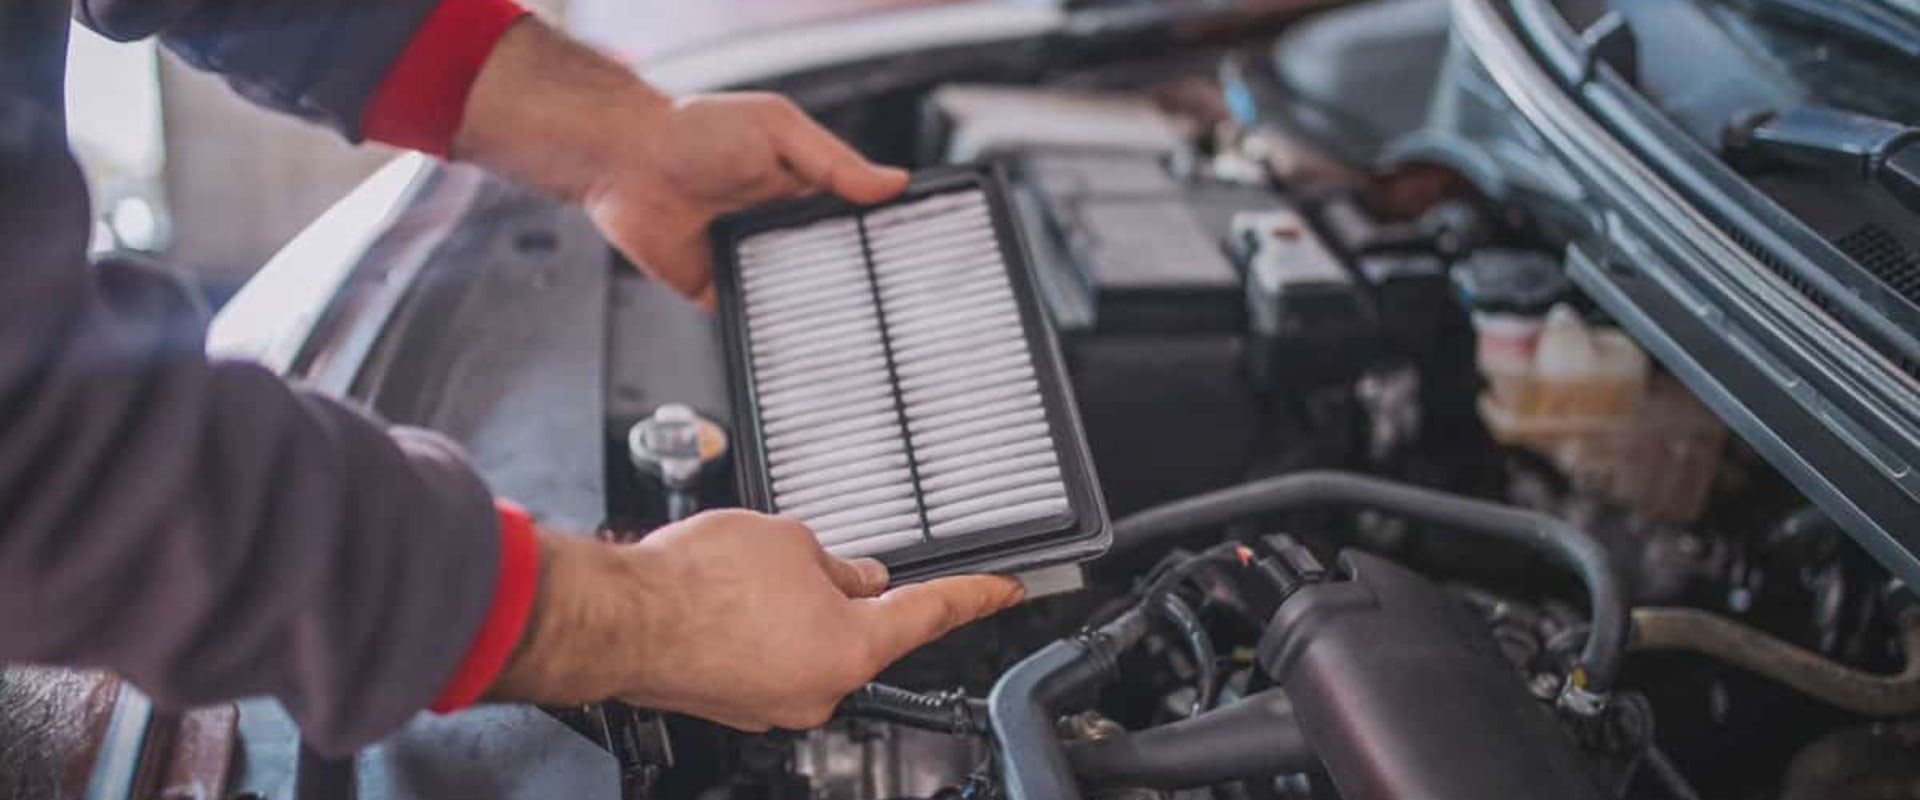 How Often Should You Change Your Car's Air Filter?